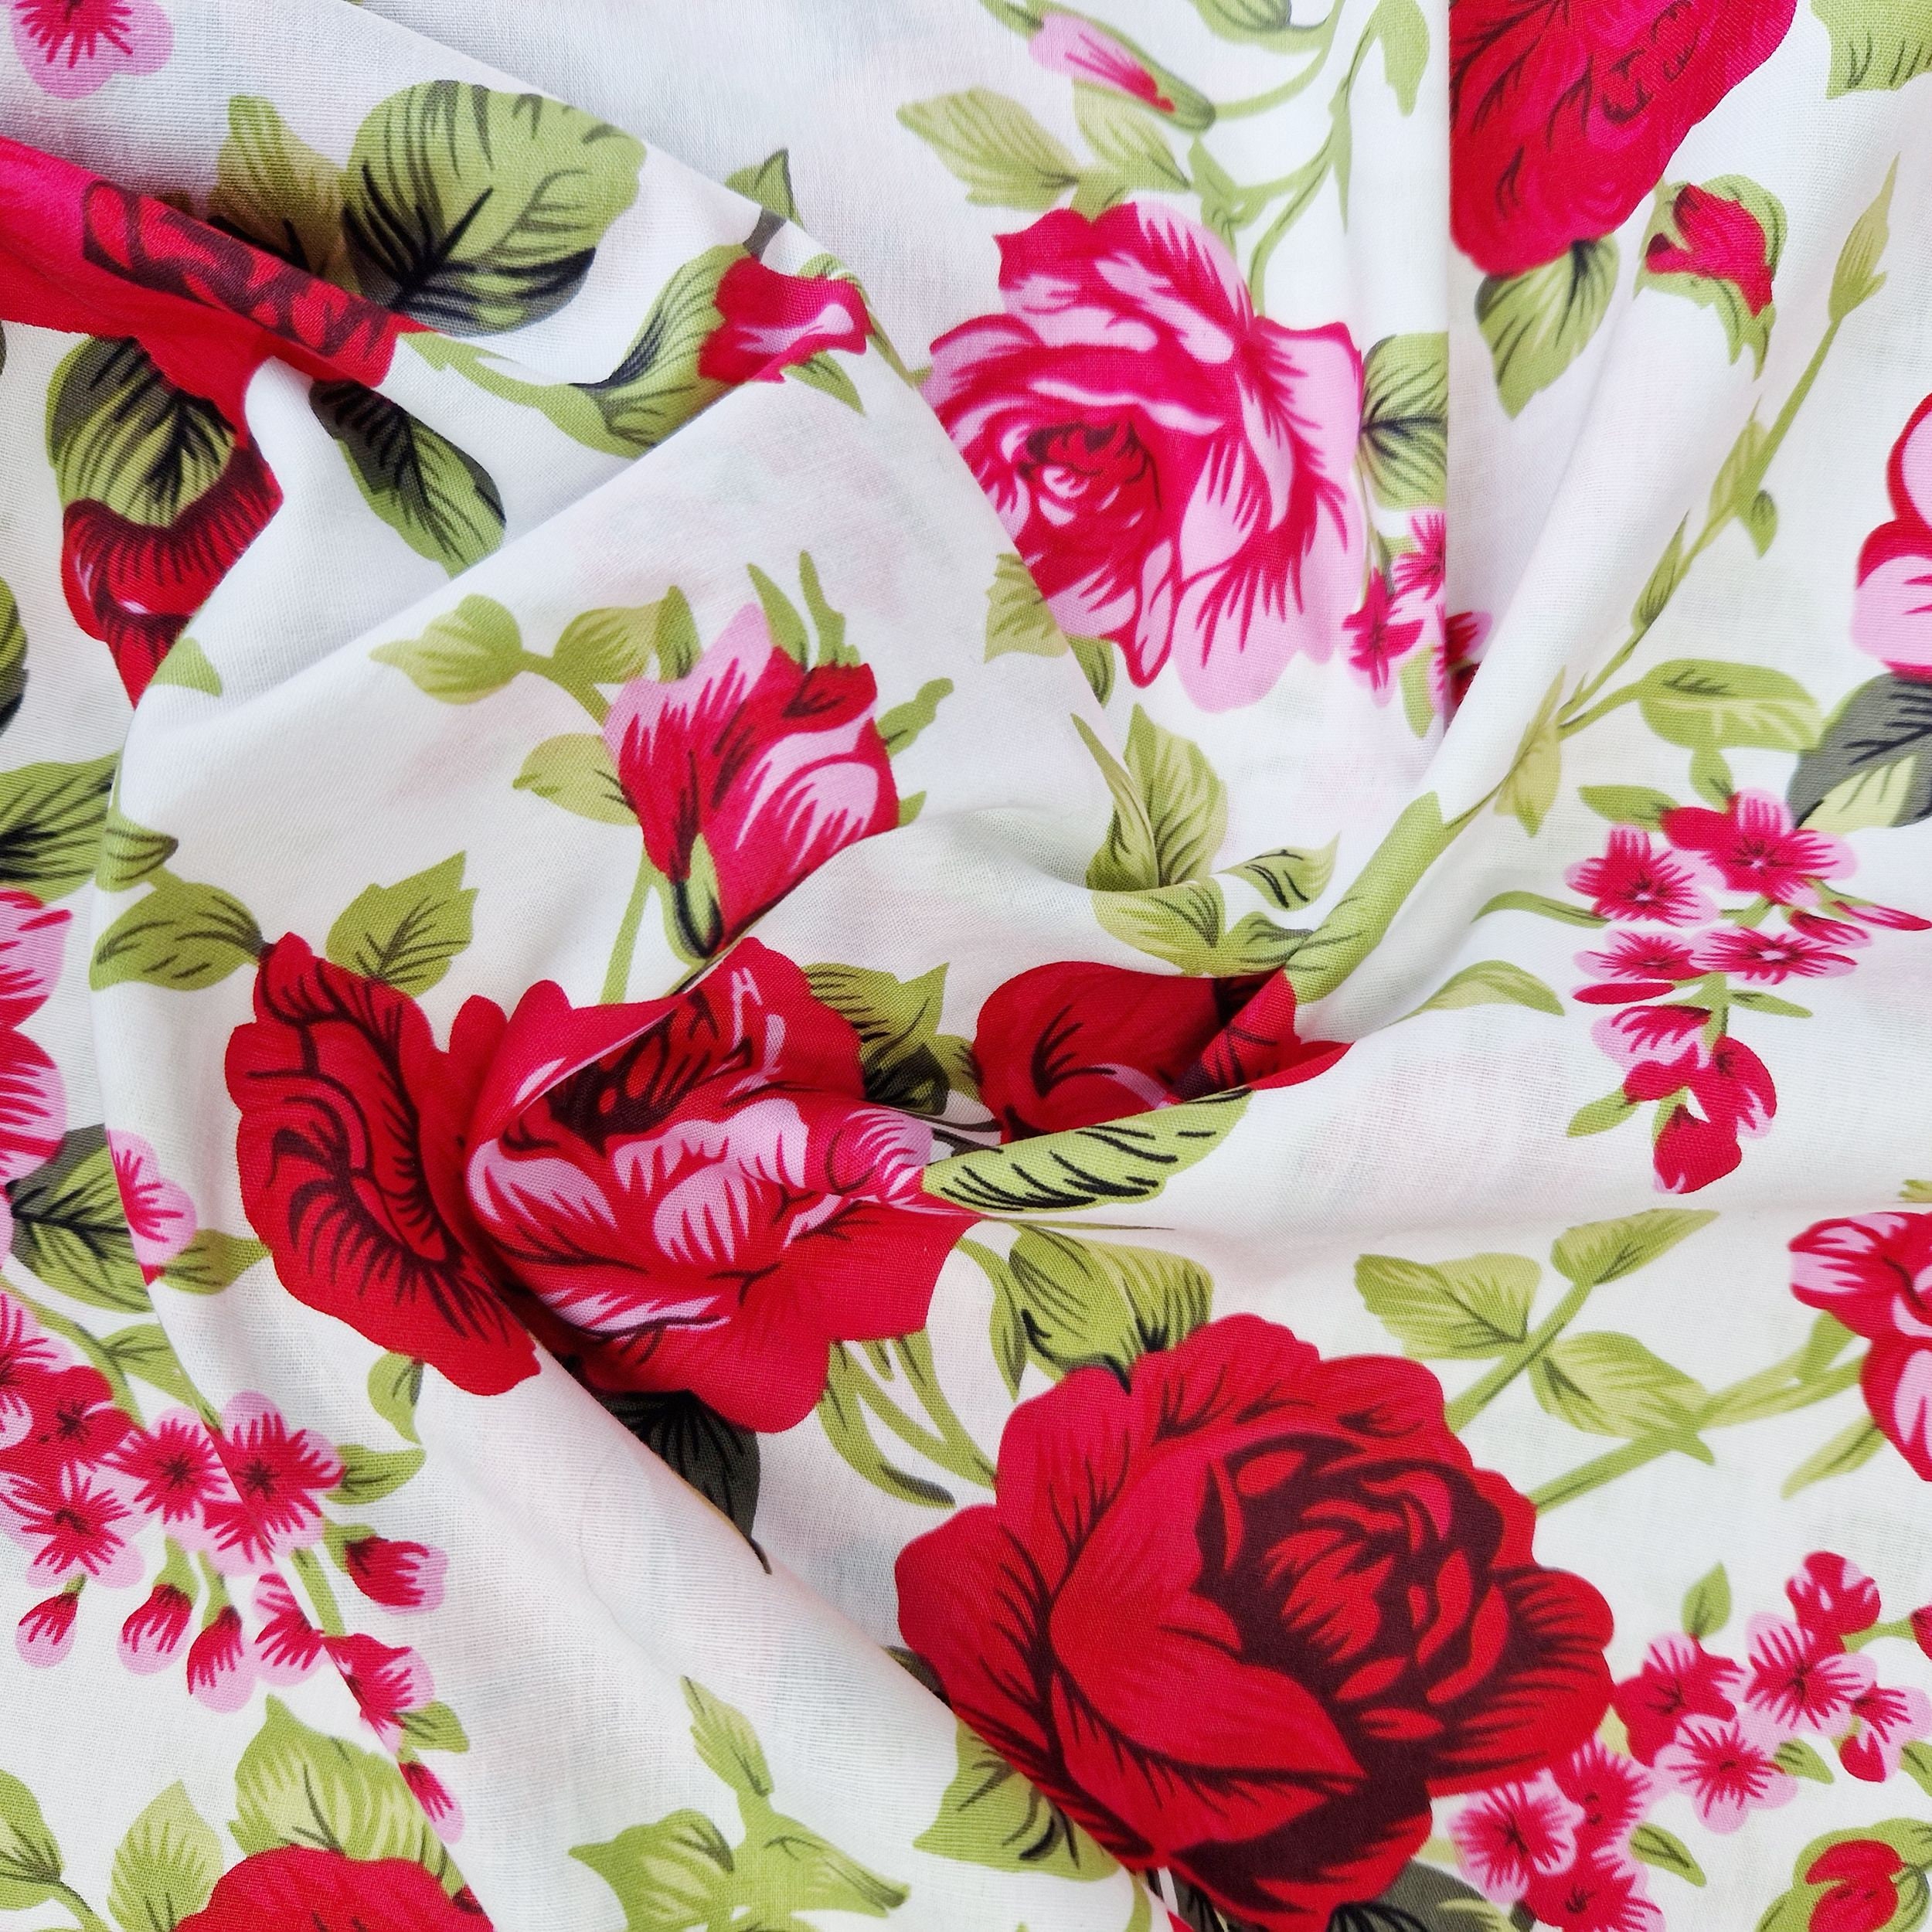 100% Cotton Fabric Red Rose on White Floral Print Craft Fabric Material -   Canada